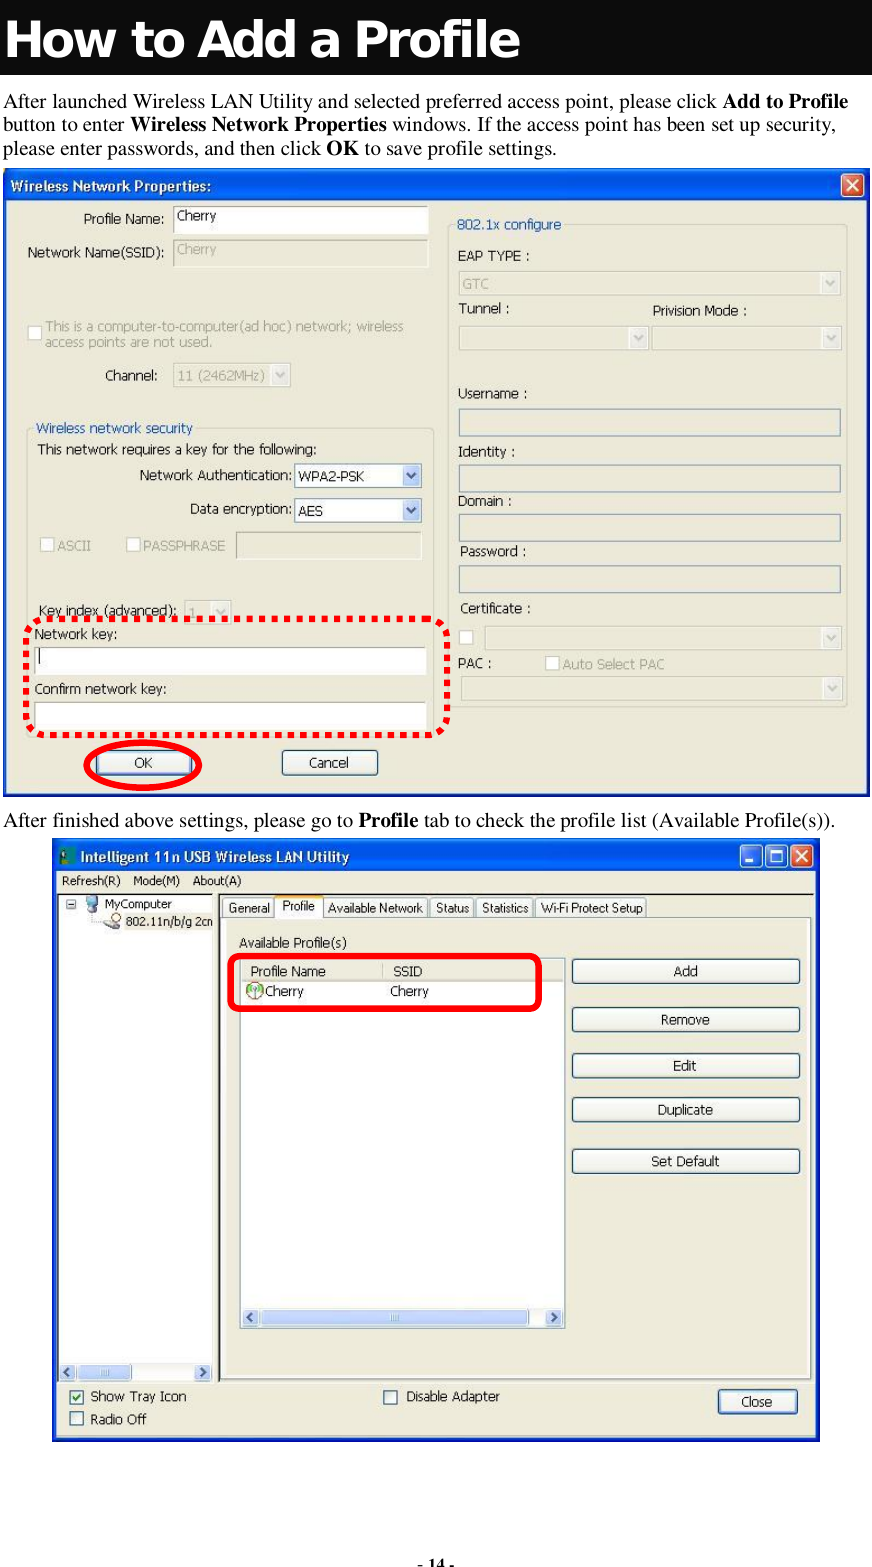  - 14 - How to Add a Profile After launched Wireless LAN Utility and selected preferred access point, please click Add to Profile button to enter Wireless Network Properties windows. If the access point has been set up security, please enter passwords, and then click OK to save profile settings.  After finished above settings, please go to Profile tab to check the profile list (Available Profile(s)).  